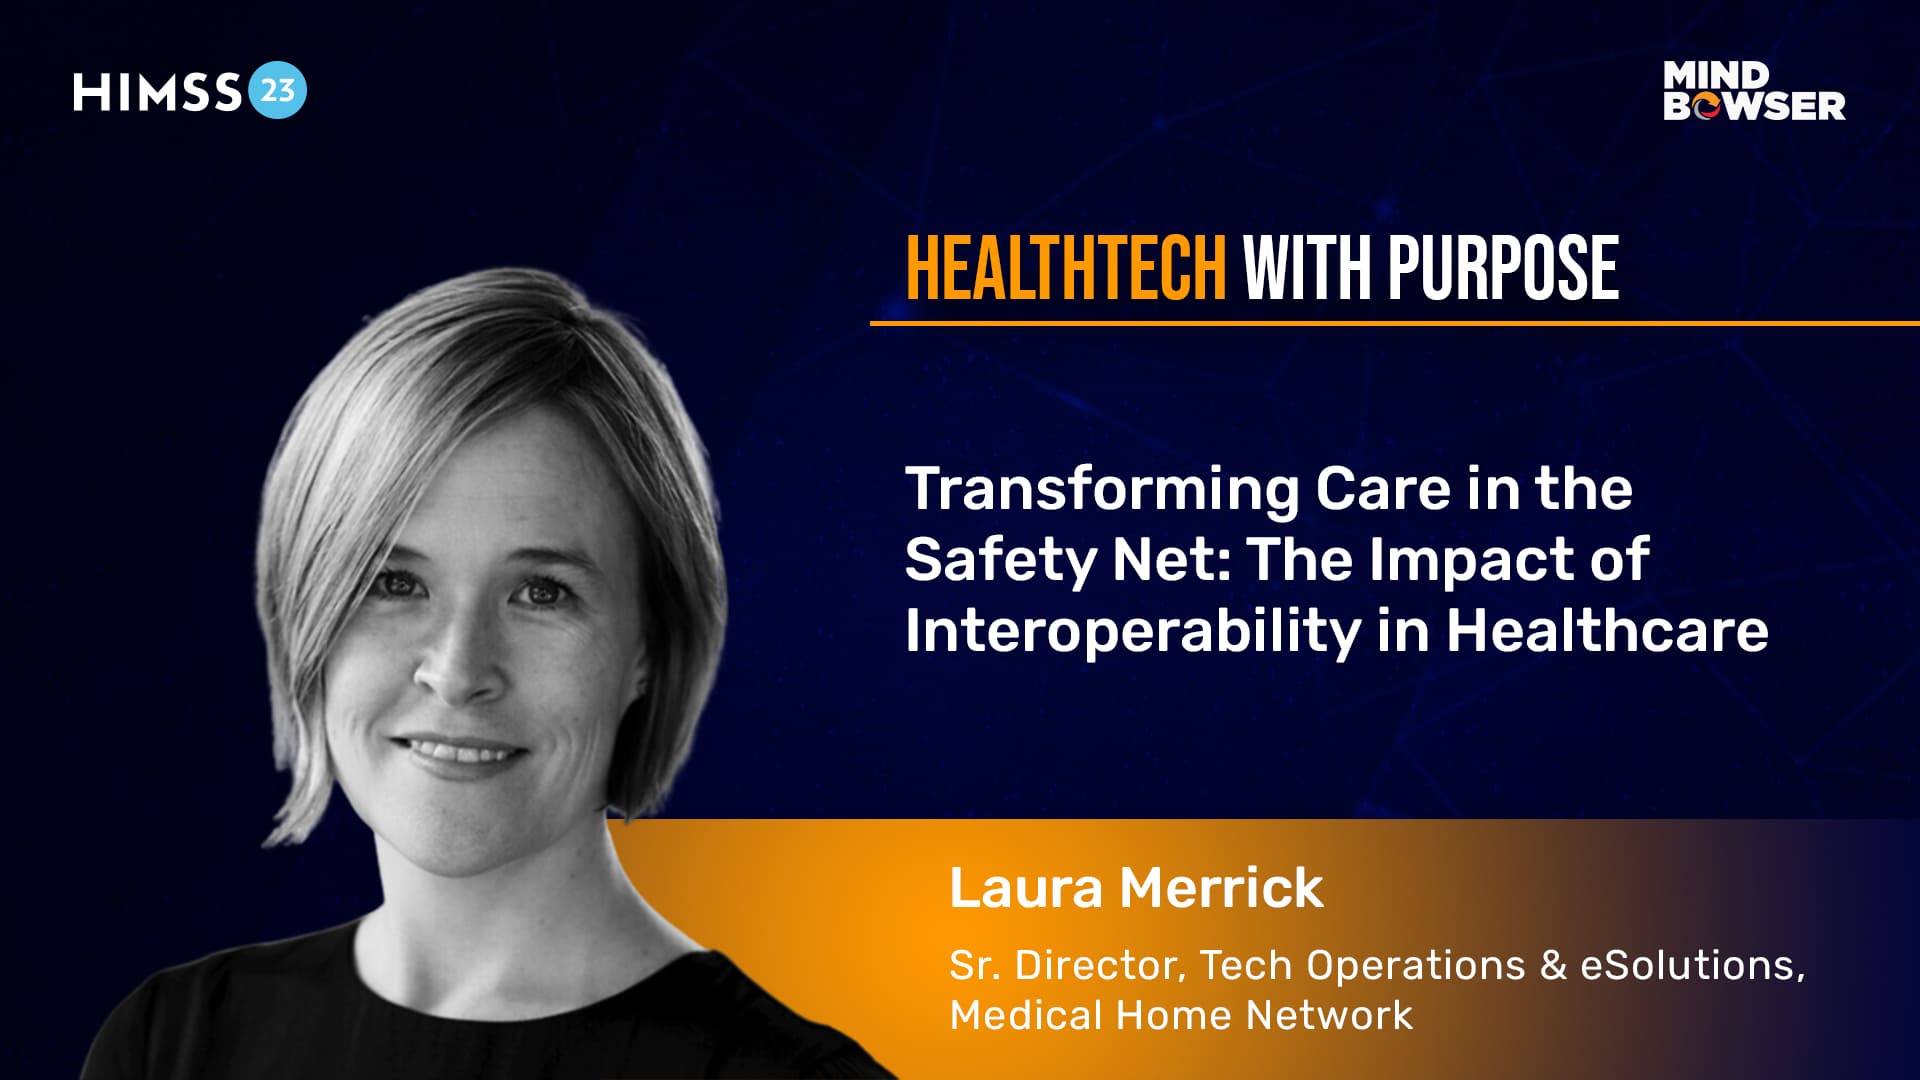 The Impact of Interoperability in Healthcare - Podcast by Laura Merrick